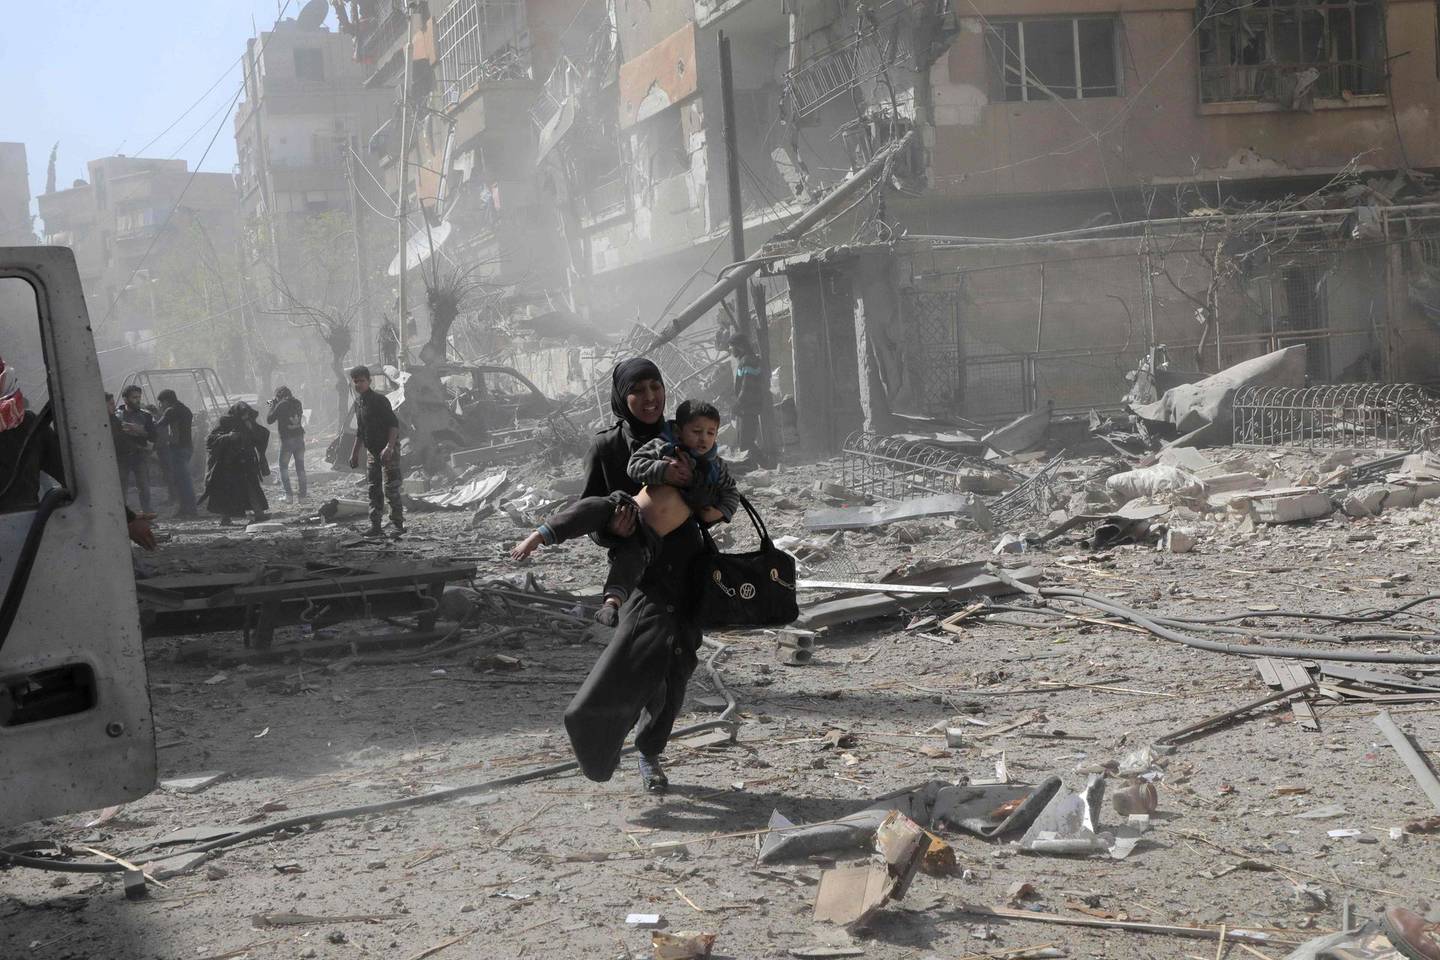 TOPSHOT - A Syrian woman holds a child and runs for cover following Syrian government air strikes on the Eastern Ghouta rebel-held enclave of Douma, on the outskirts of the capital Damascus on March 20, 2018.
Syrian regime and allied forces battled to suppress the last pockets of resistance in and around Damascus while the beleaguered Kurds in the north braced for further Turkish advances. Assad has in recent months brought swathes of territory back under his control thanks to heavy Russian involvement, as well as support from other forces such as the Iran-backed Lebanese Hezbollah militia. Eastern Ghouta's main town of Douma remains under rebel control but even as a trickle of emergency medical evacuations was scheduled to continue, the regime continued to pound the enclave. / AFP PHOTO / HAMZA AL-AJWEH